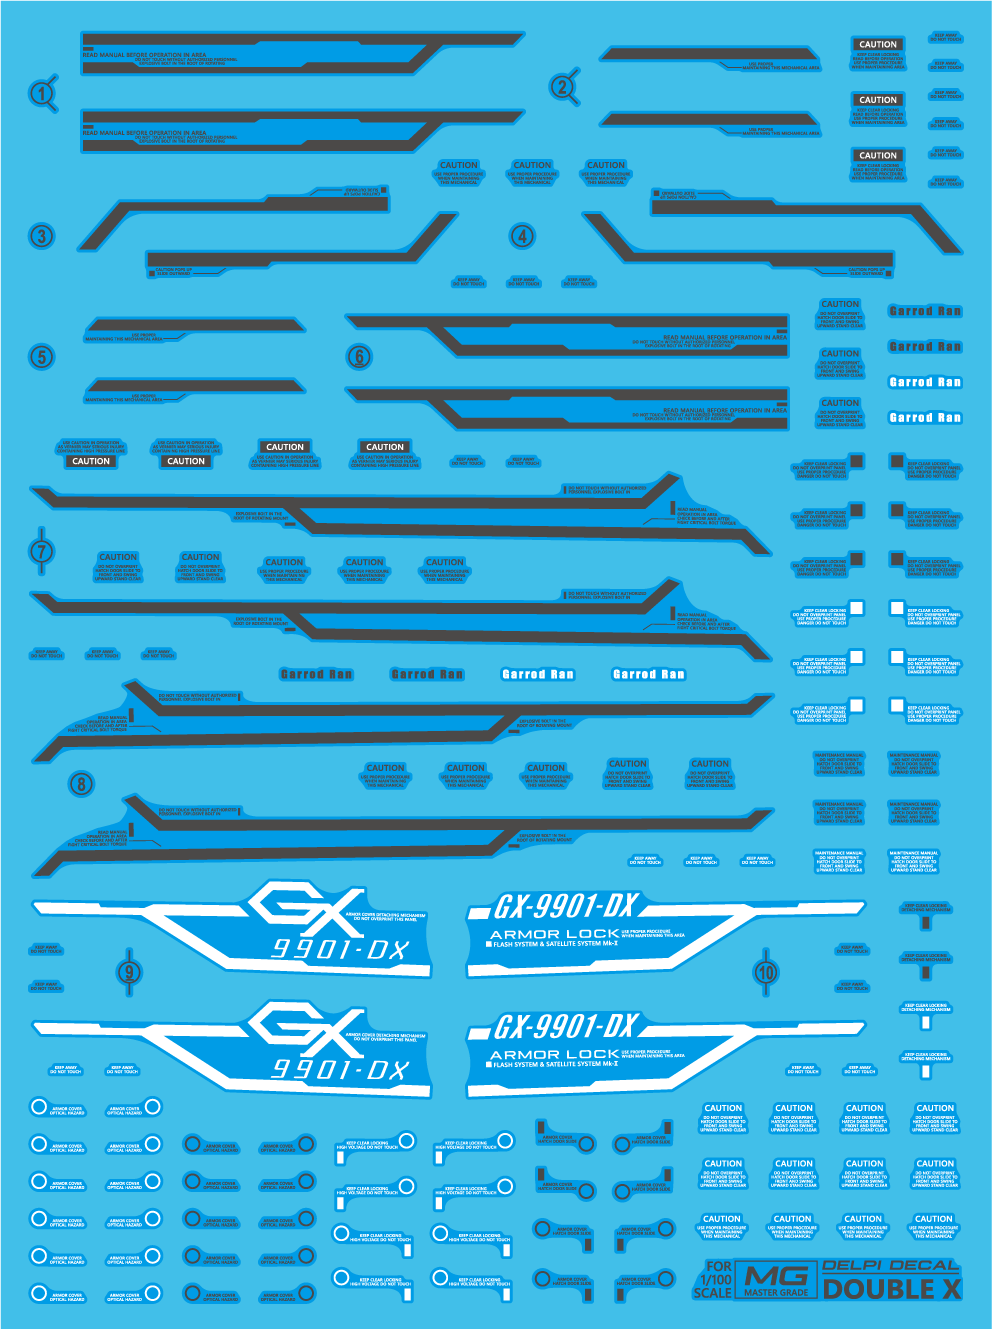 Delpi - MG DOUBLE X WATER DECAL - (Select from Manual Normal, Manual Holo, Delpi Normal, or Delpi Holo)